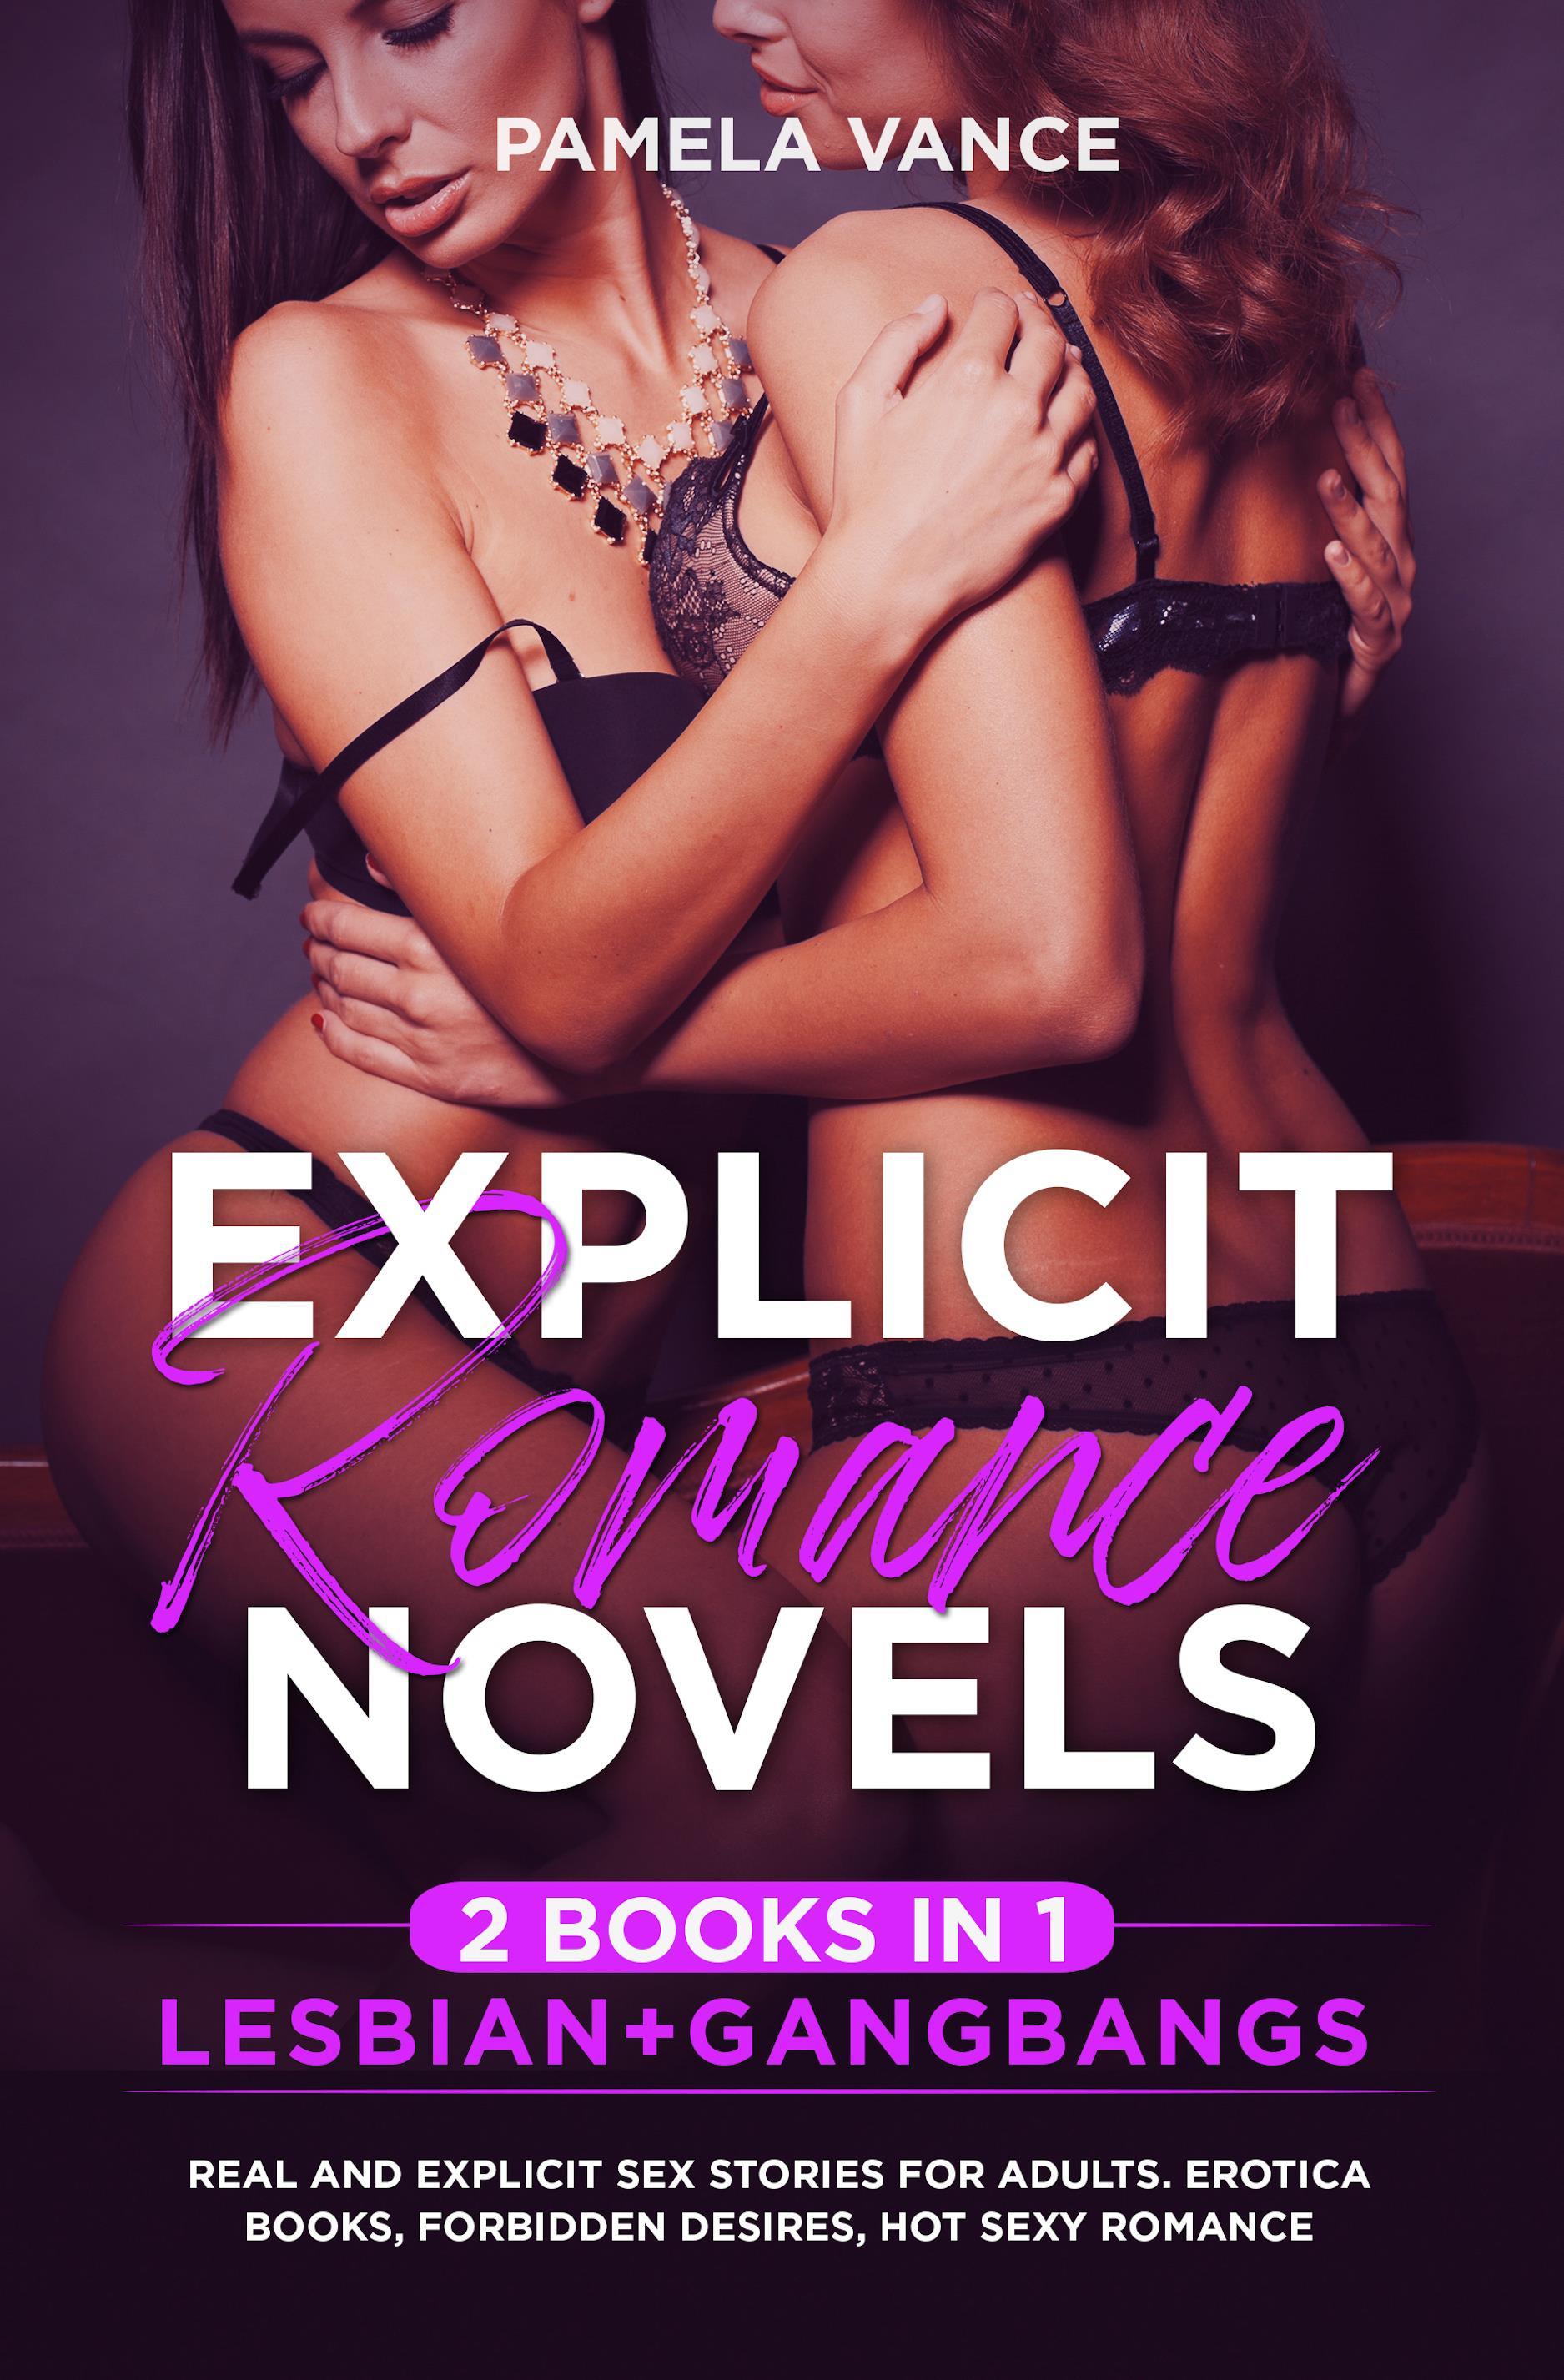 Explicit Romance Novels (2 Books in 1). Lesbian+Gangbangs Real and Explicit Sex Stories for Adults. Erotica Books, Forbidden Desires, Hot Sexy Romance